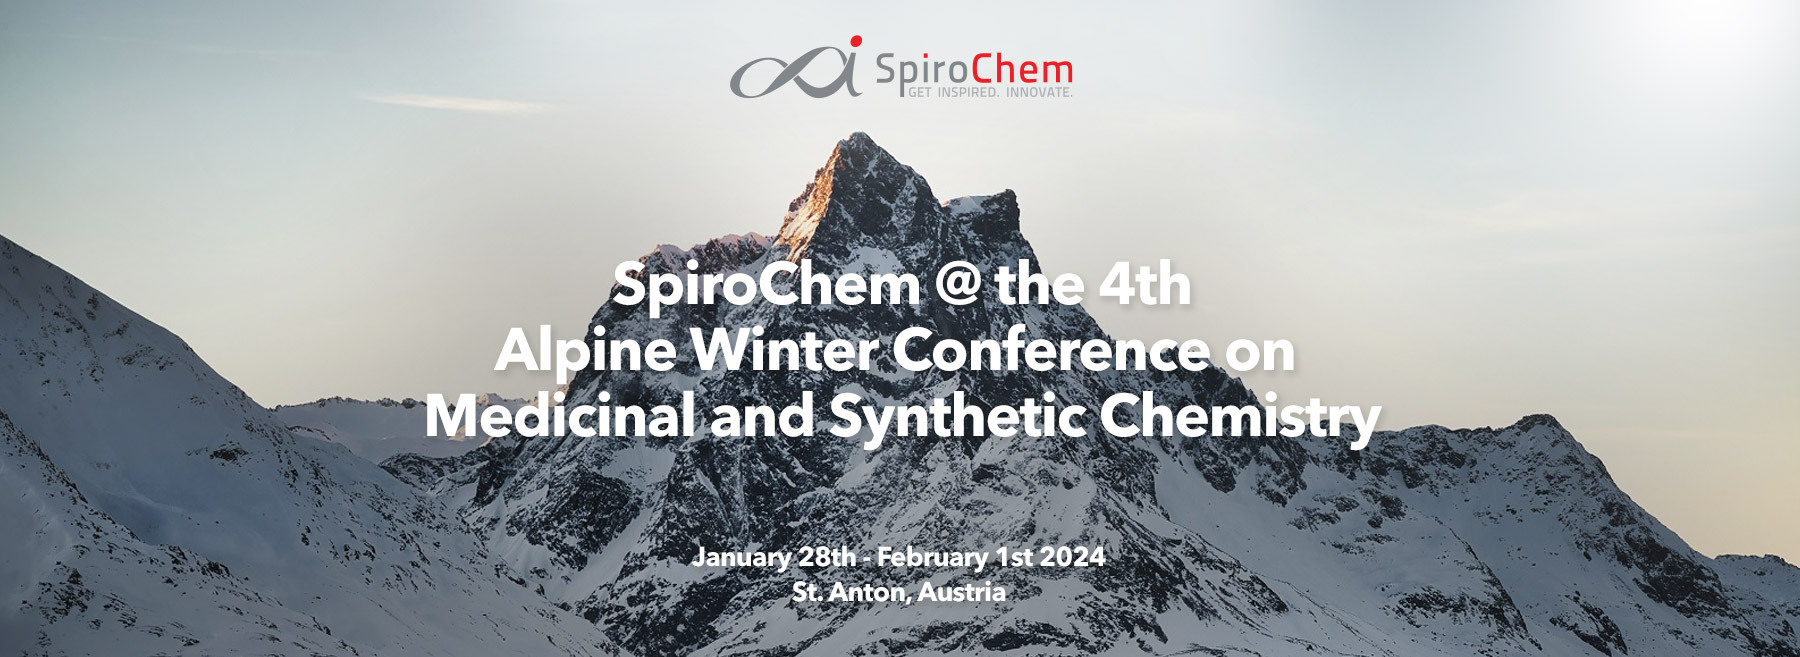 SpiroChem @ the 4th Alpine Winter Conference on Medicinal and Synthetic Chemistry